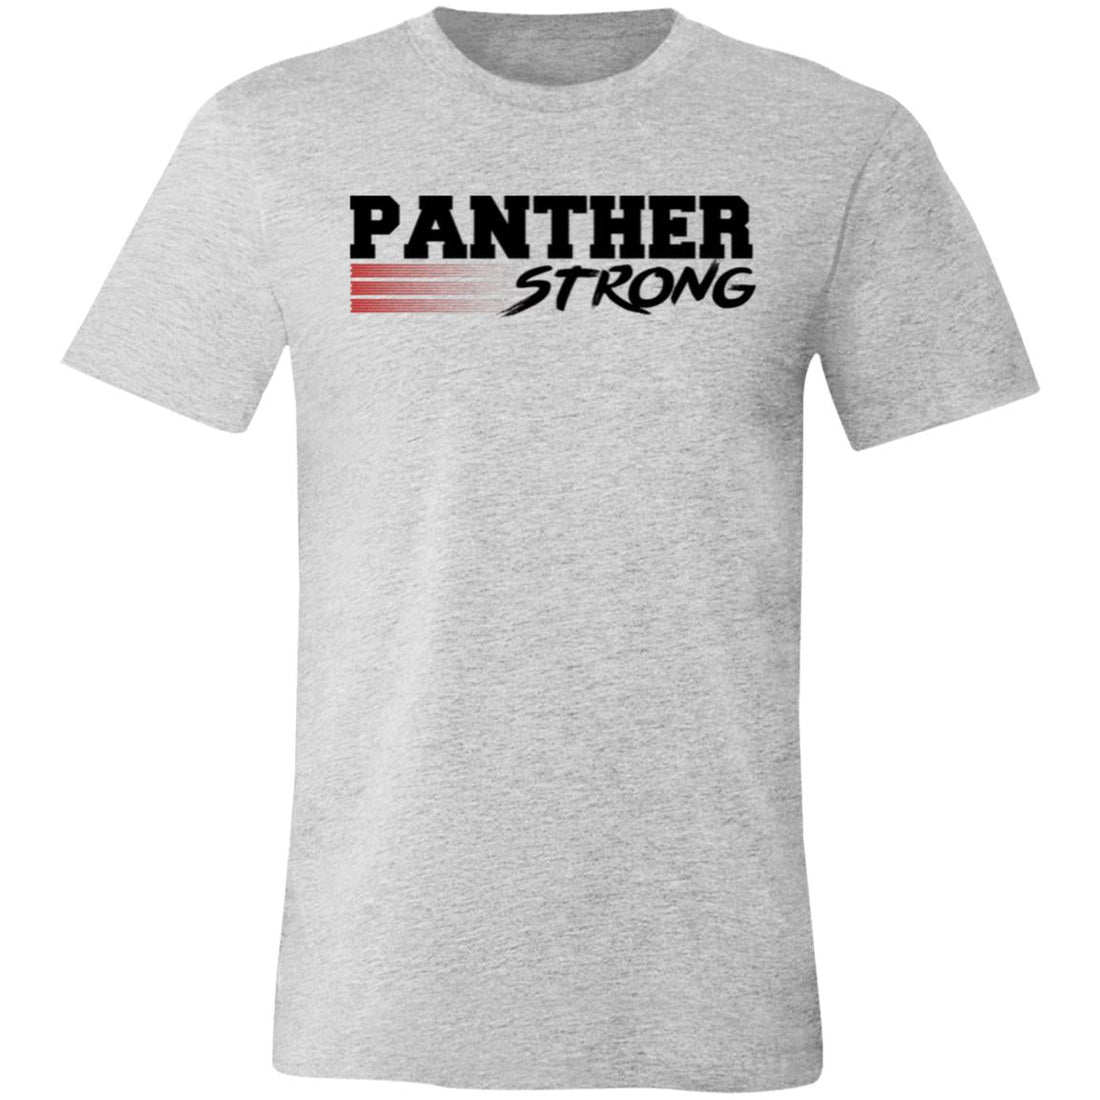 Panther Strong T-Shirt - T-Shirts - Positively Sassy - Panther Strong T-Shirt